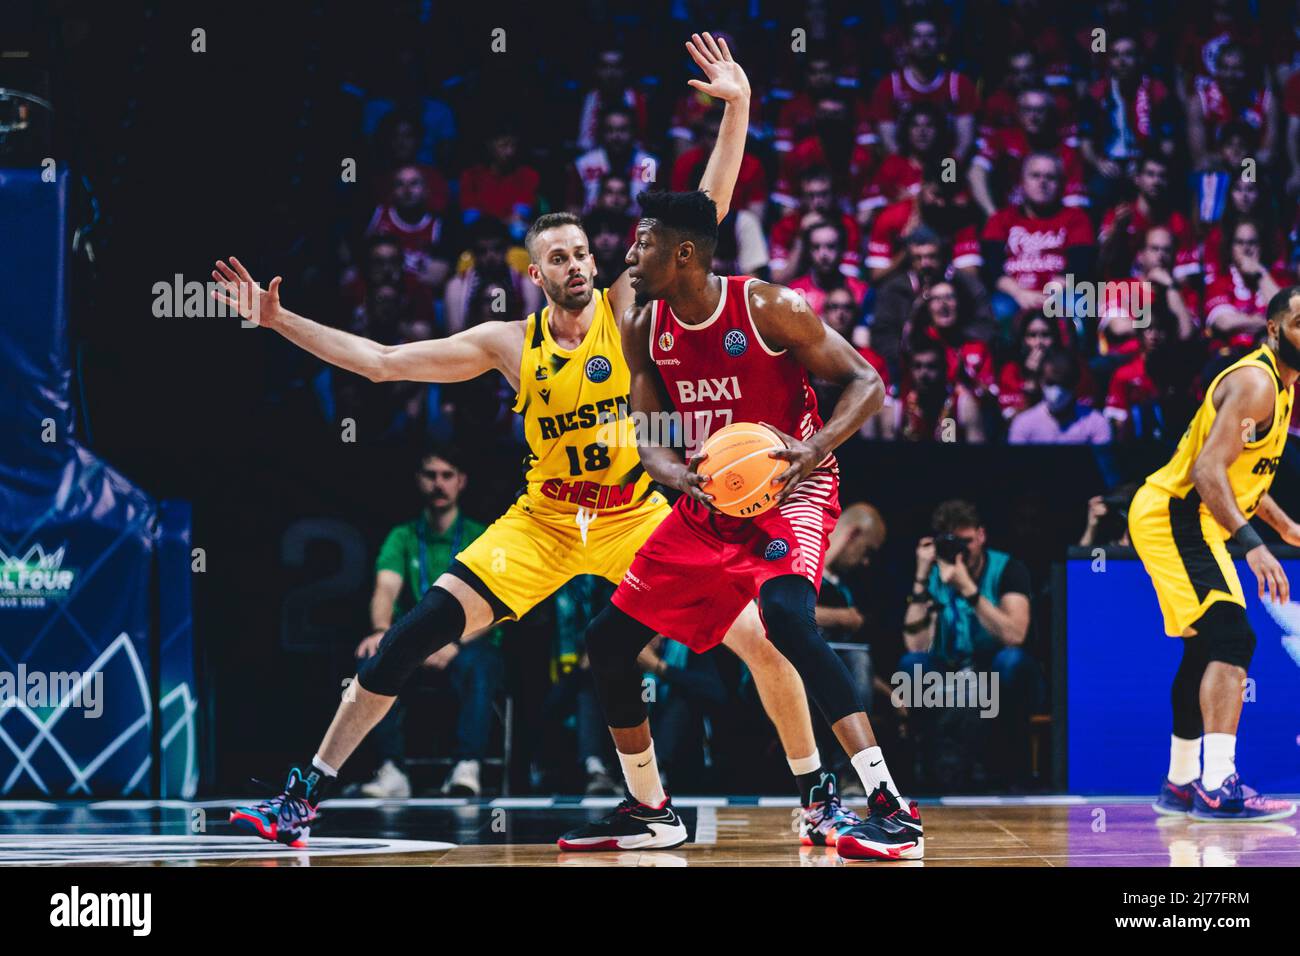 Bilbao, Basque Country, SPAIN. 7th May, 2022. YANKUBA SIMA (77) of Manresa with the ball controlled against JONAS WOHLFARTH-BOTTERMANN (18) of Ludwigsburg during the Basketball Campions League semi-final game between MHP Riesen Ludwigsburg and Baxi Manresa at Bilbao Arena.Bilbao hosted the first ever Basketball Champions League Final 4 in a neutral venue. (Credit Image: © Edu Del Fresno/ZUMA Press Wire) Stock Photo